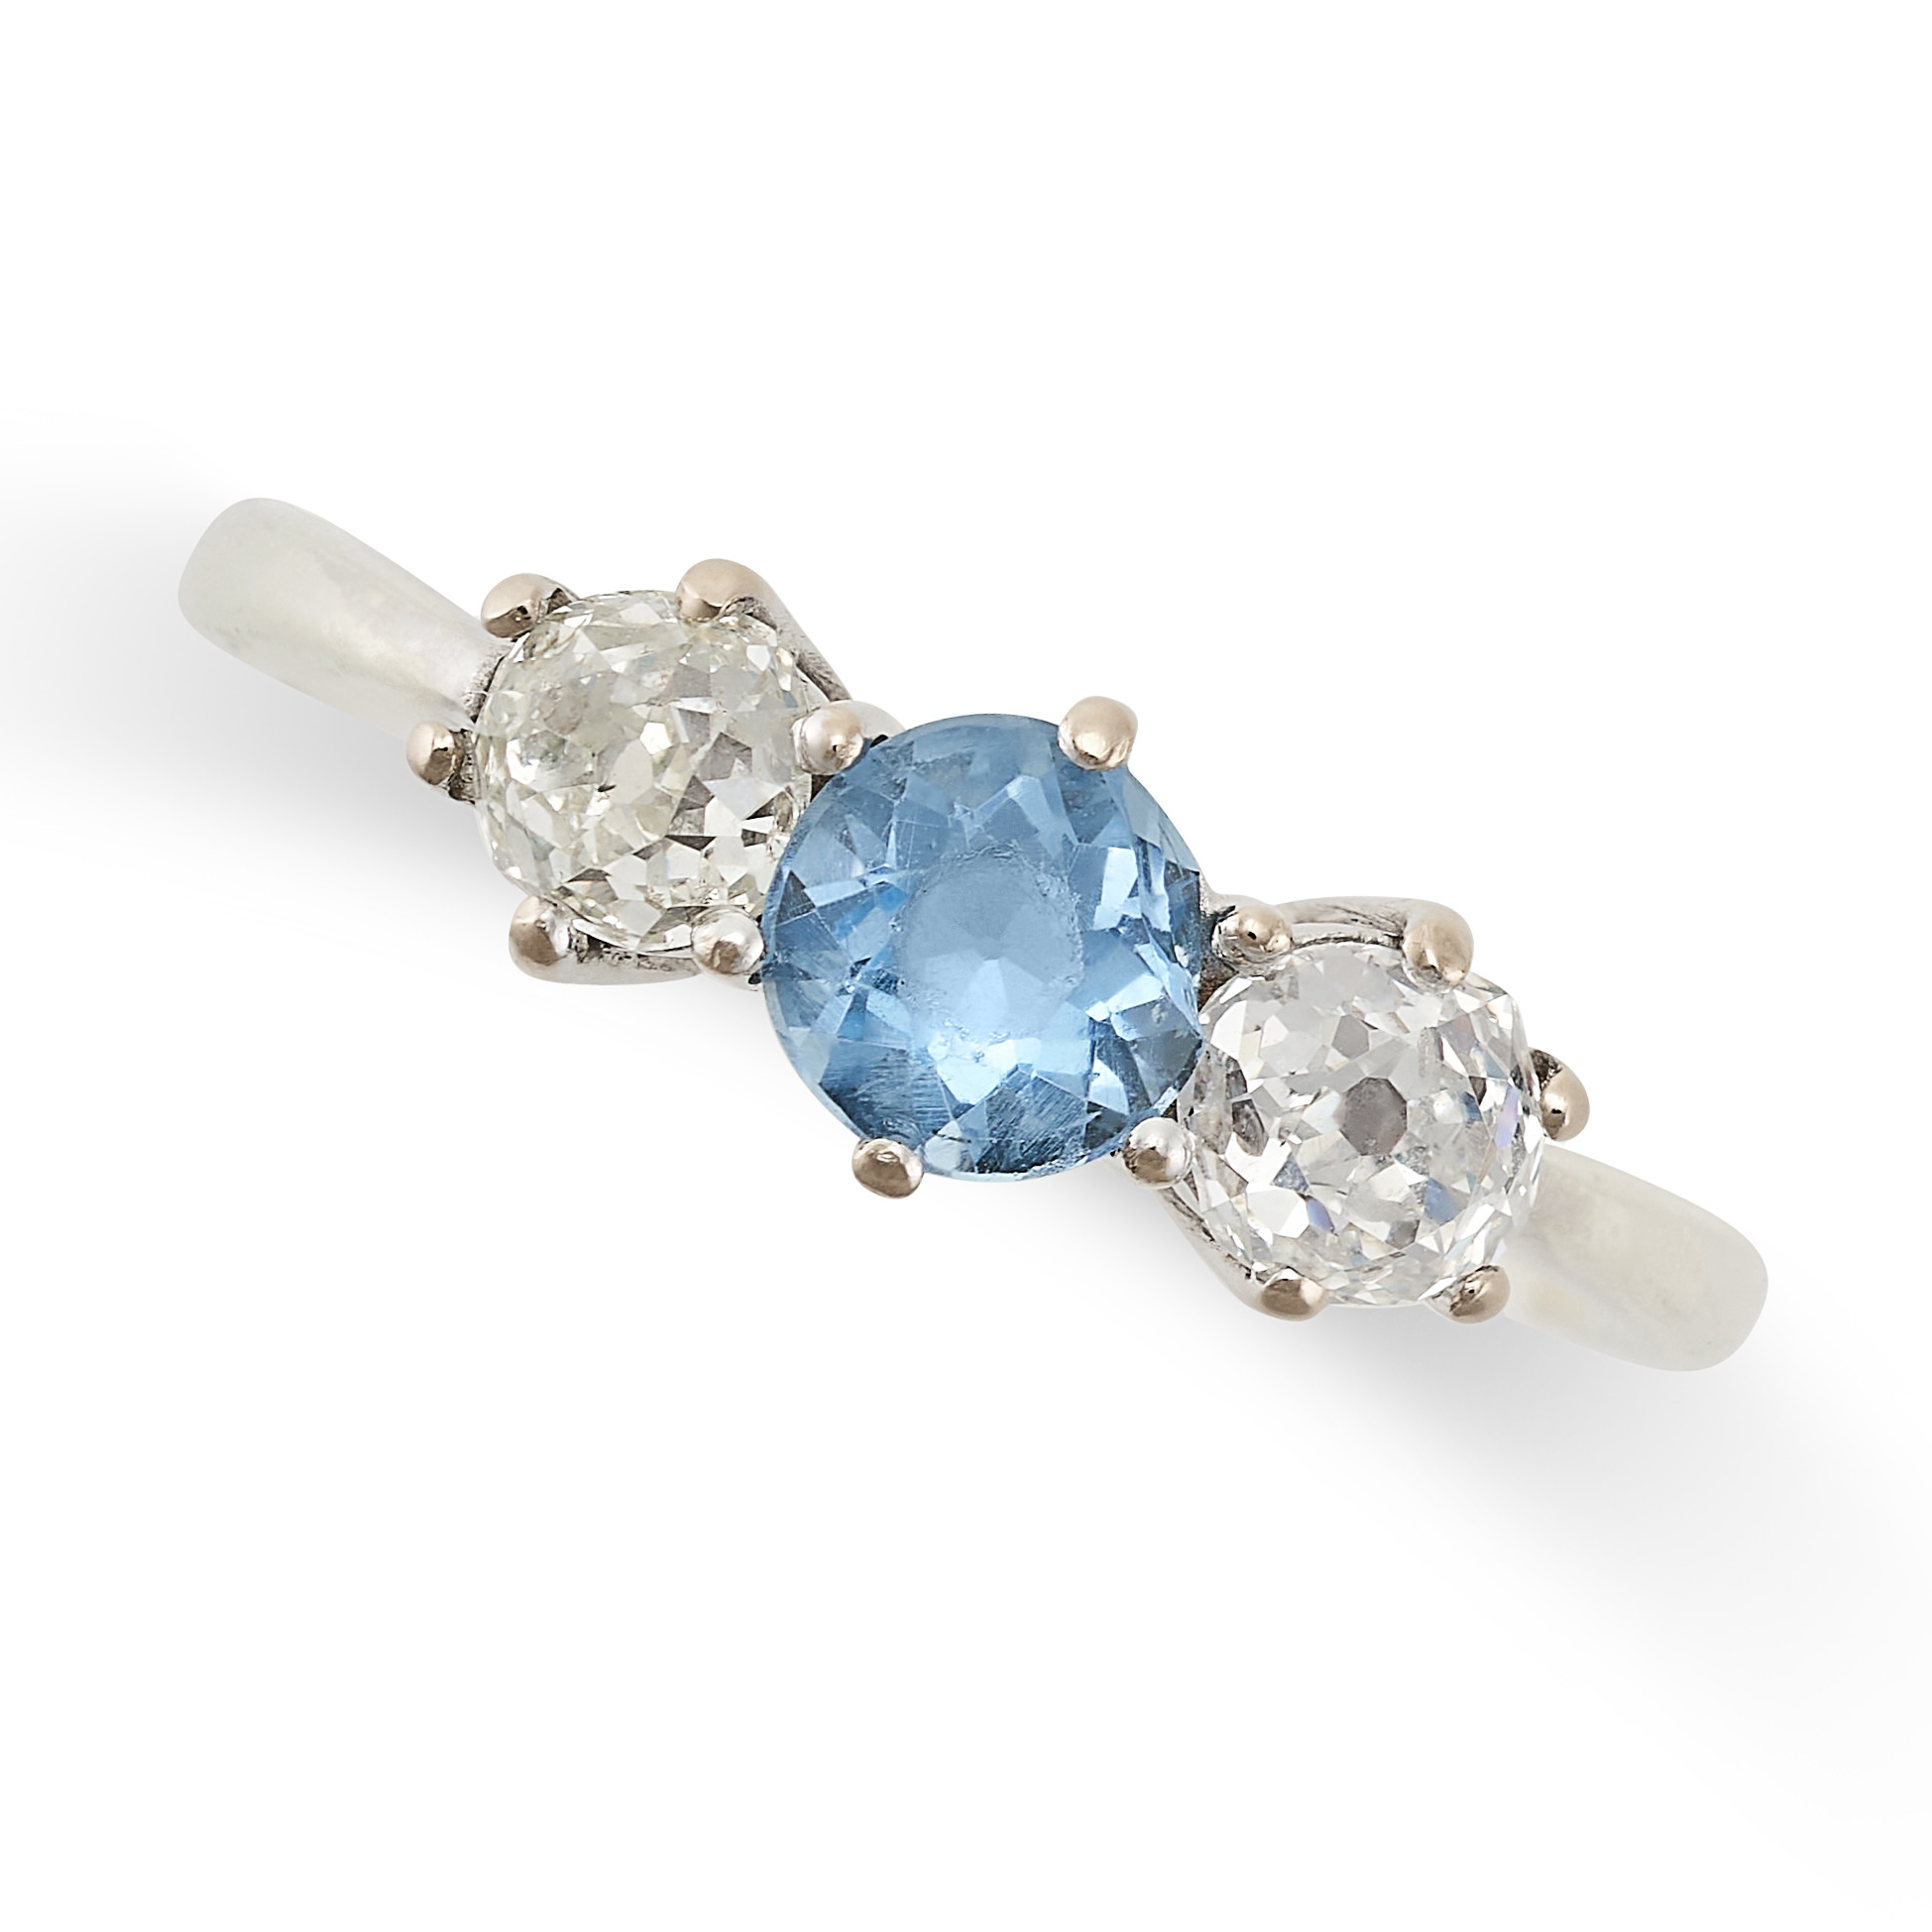 A DIAMOND AND BLUE PASTE RING in 9ct yellow gold, set with a round cut blue paste gemstone between